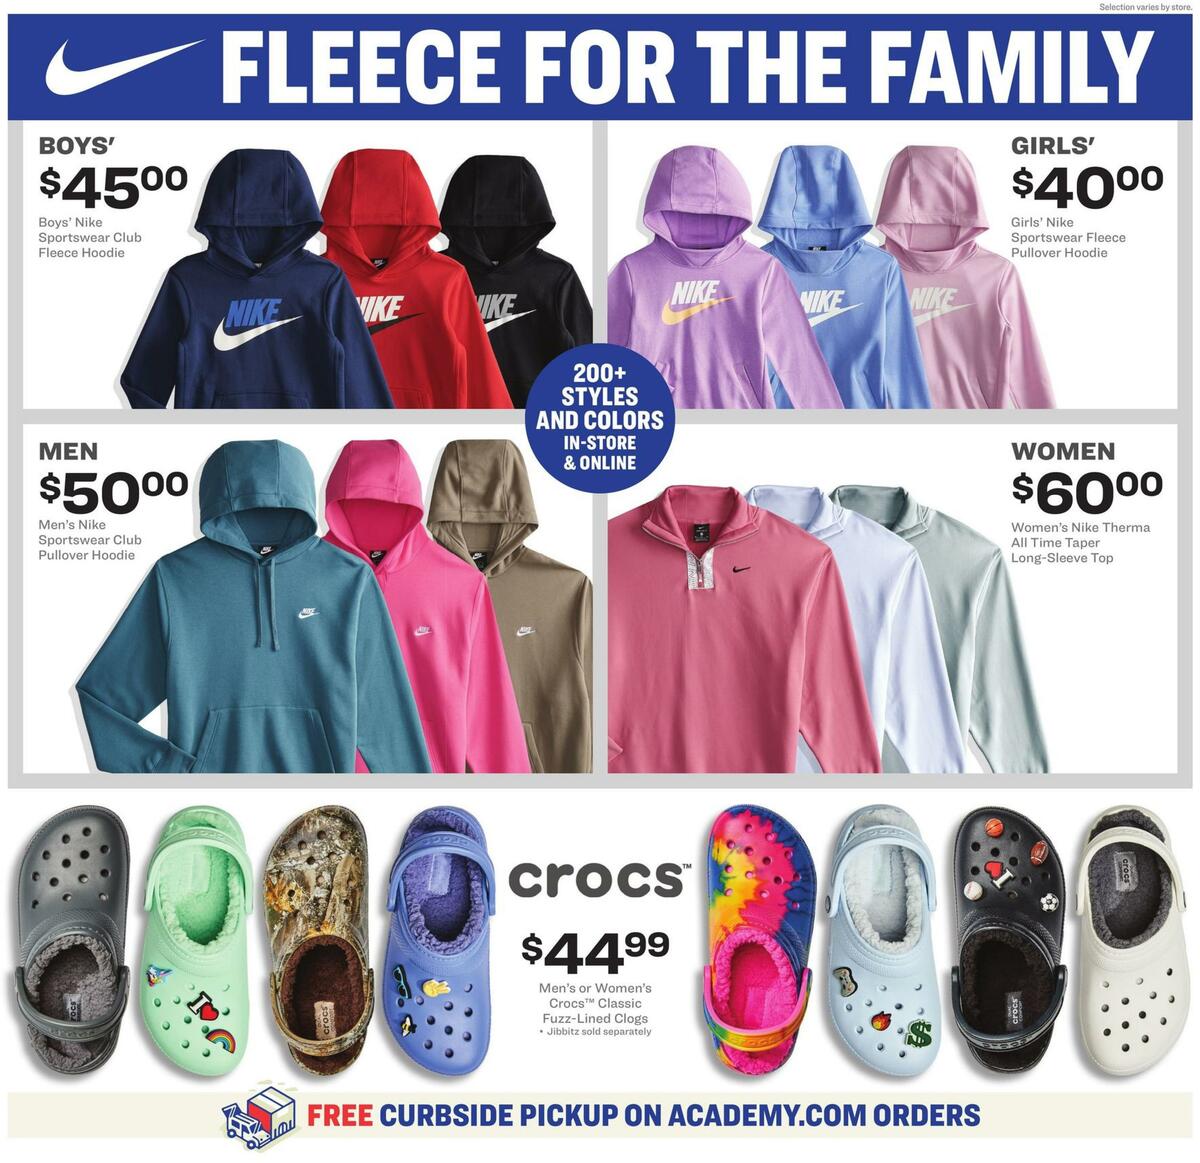 Academy Sports + Outdoors Weekly Ad from October 26